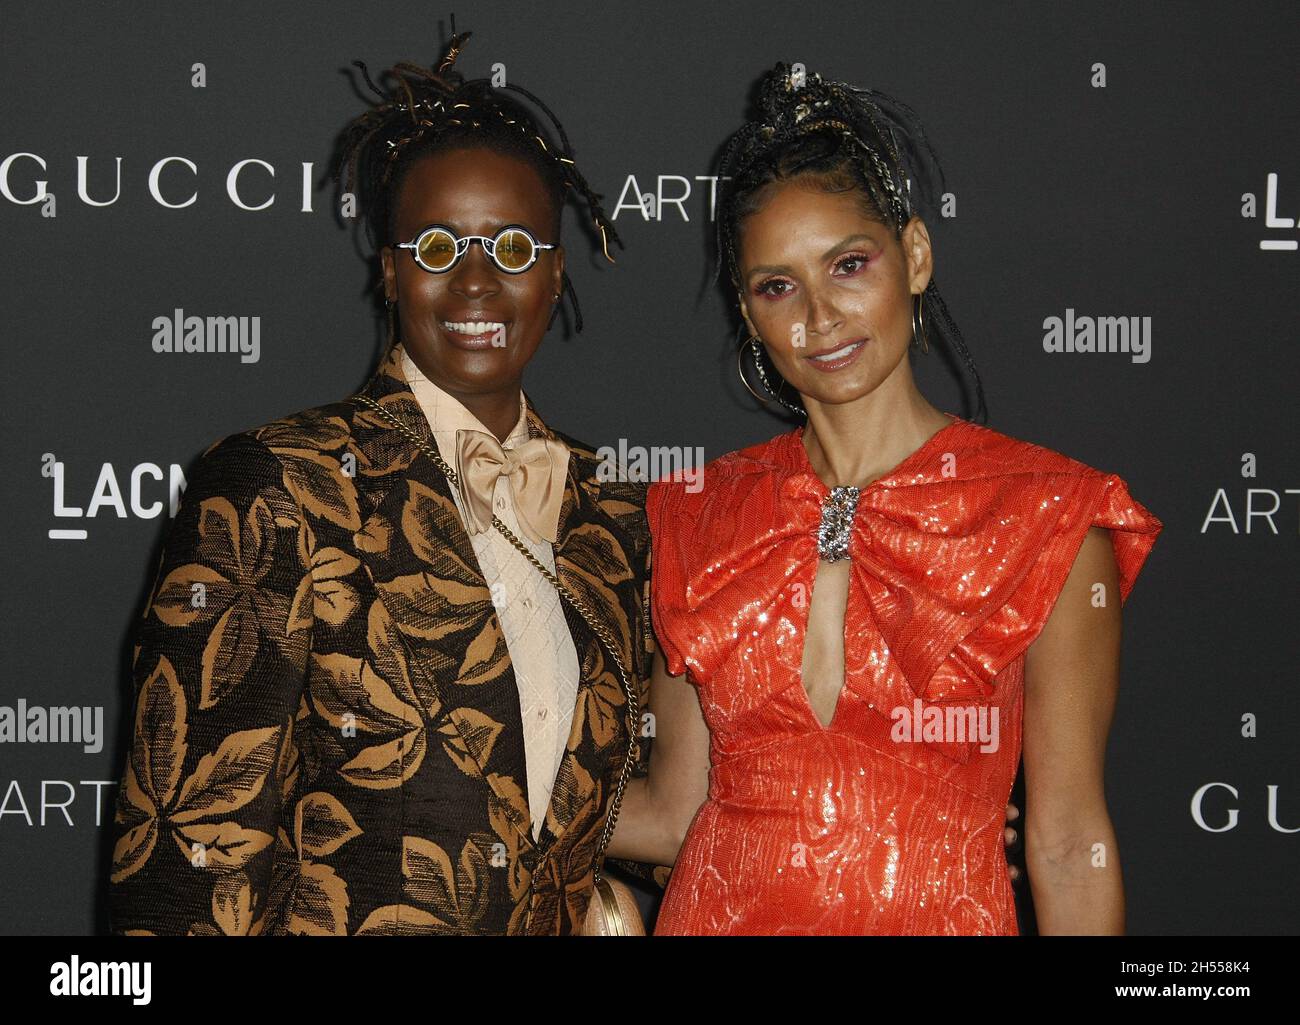 LOS ANGELES, CALIFORNIA - NOVEMBER 06: Mickalene Thomas, Racquel Chevremont  attend the 10th Annual LACMA ART+FILM GALA presented by Gucci at Los  Angeles County Museum of Art on November 06, 2021 in